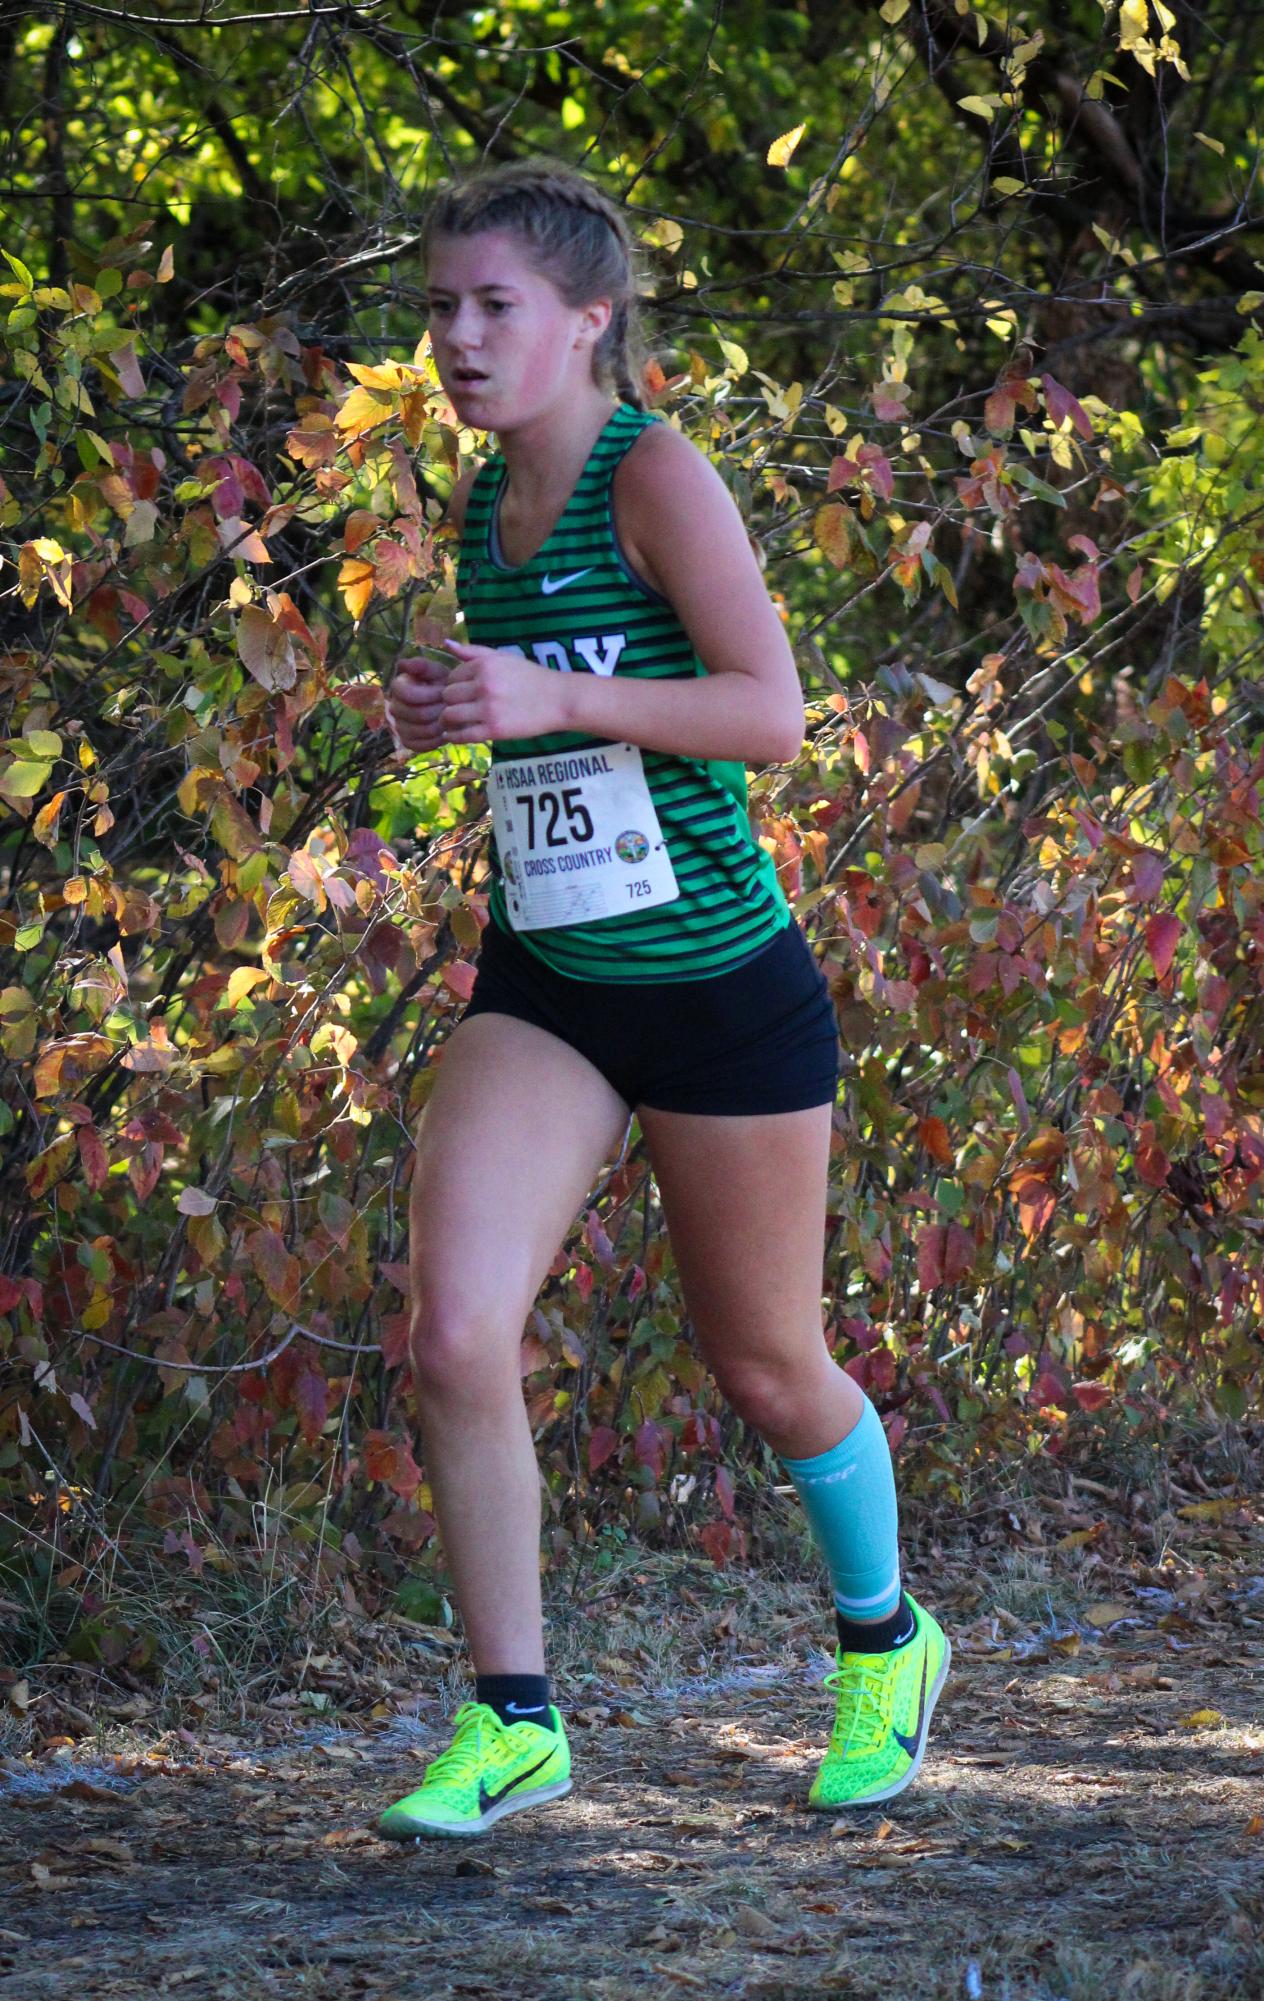 Cross+country+regionals+at+Cessna+Activity+Center+%28Photos+by+Abigail+Kuhn%29